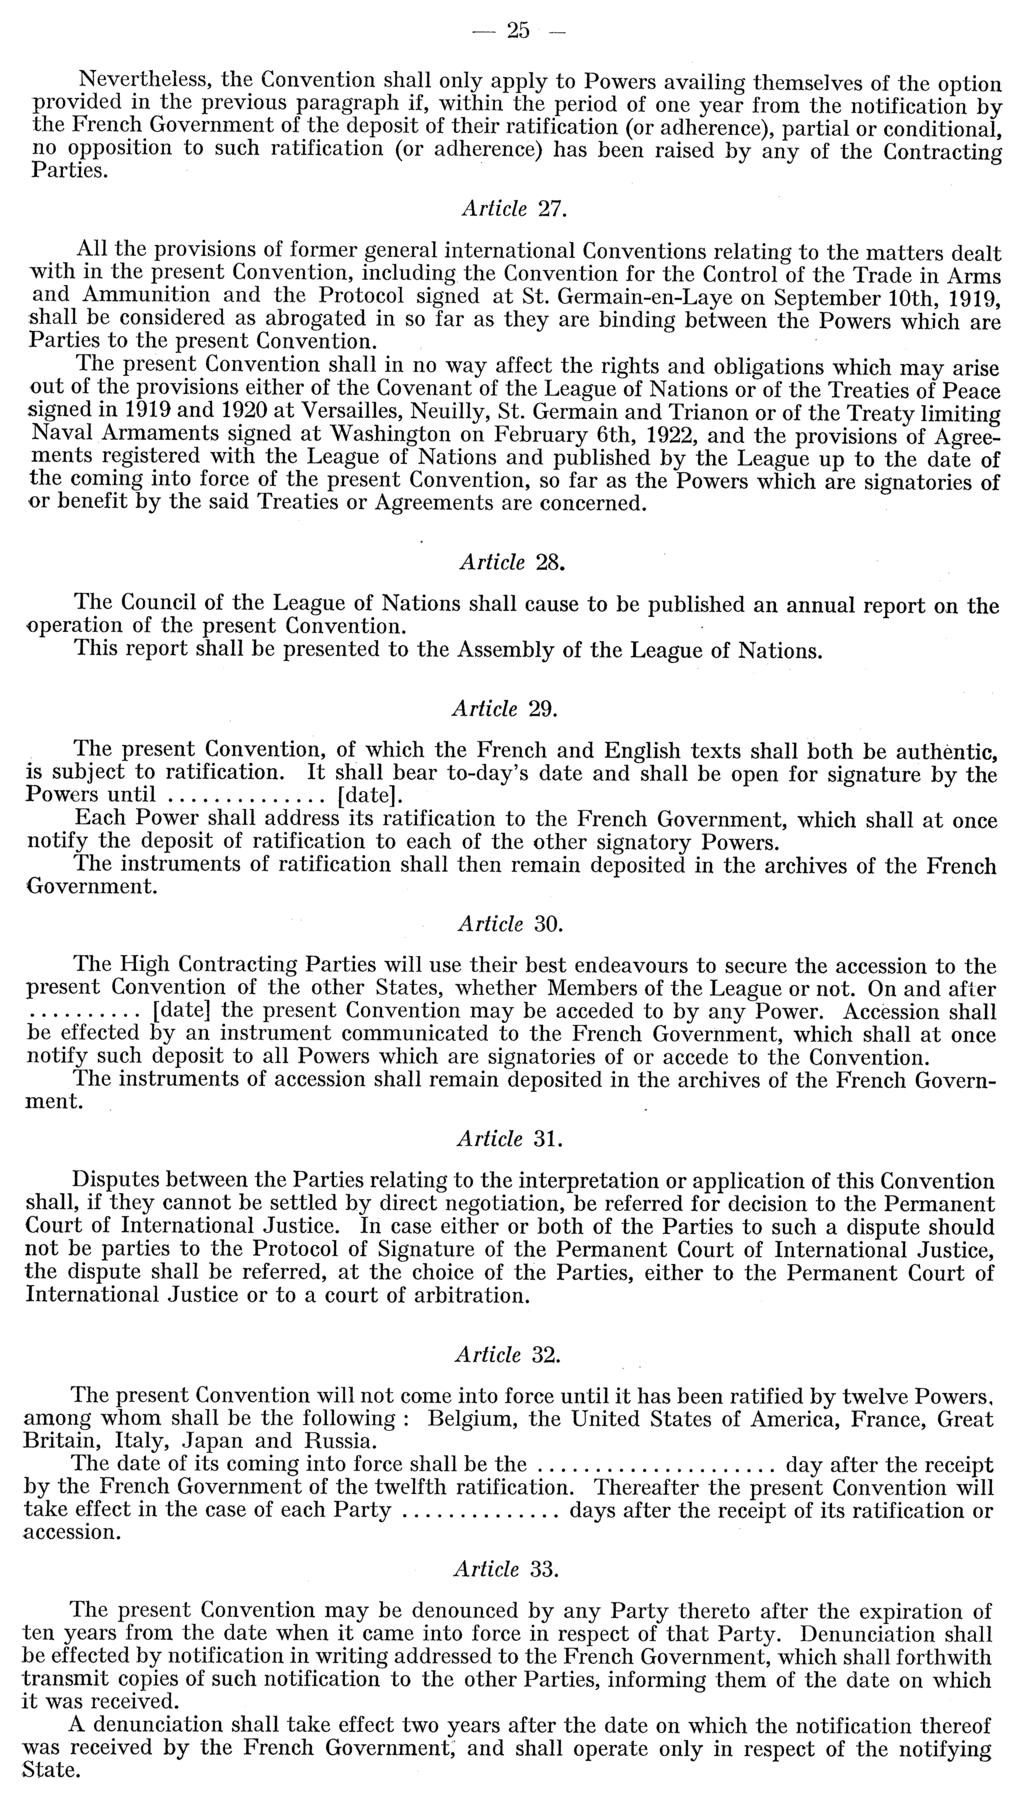 25 - Nevertheless, the Convention shall only apply to Powers availing themselves of the option provided in the previous paragraph if, within the period of one year from the notification by the French